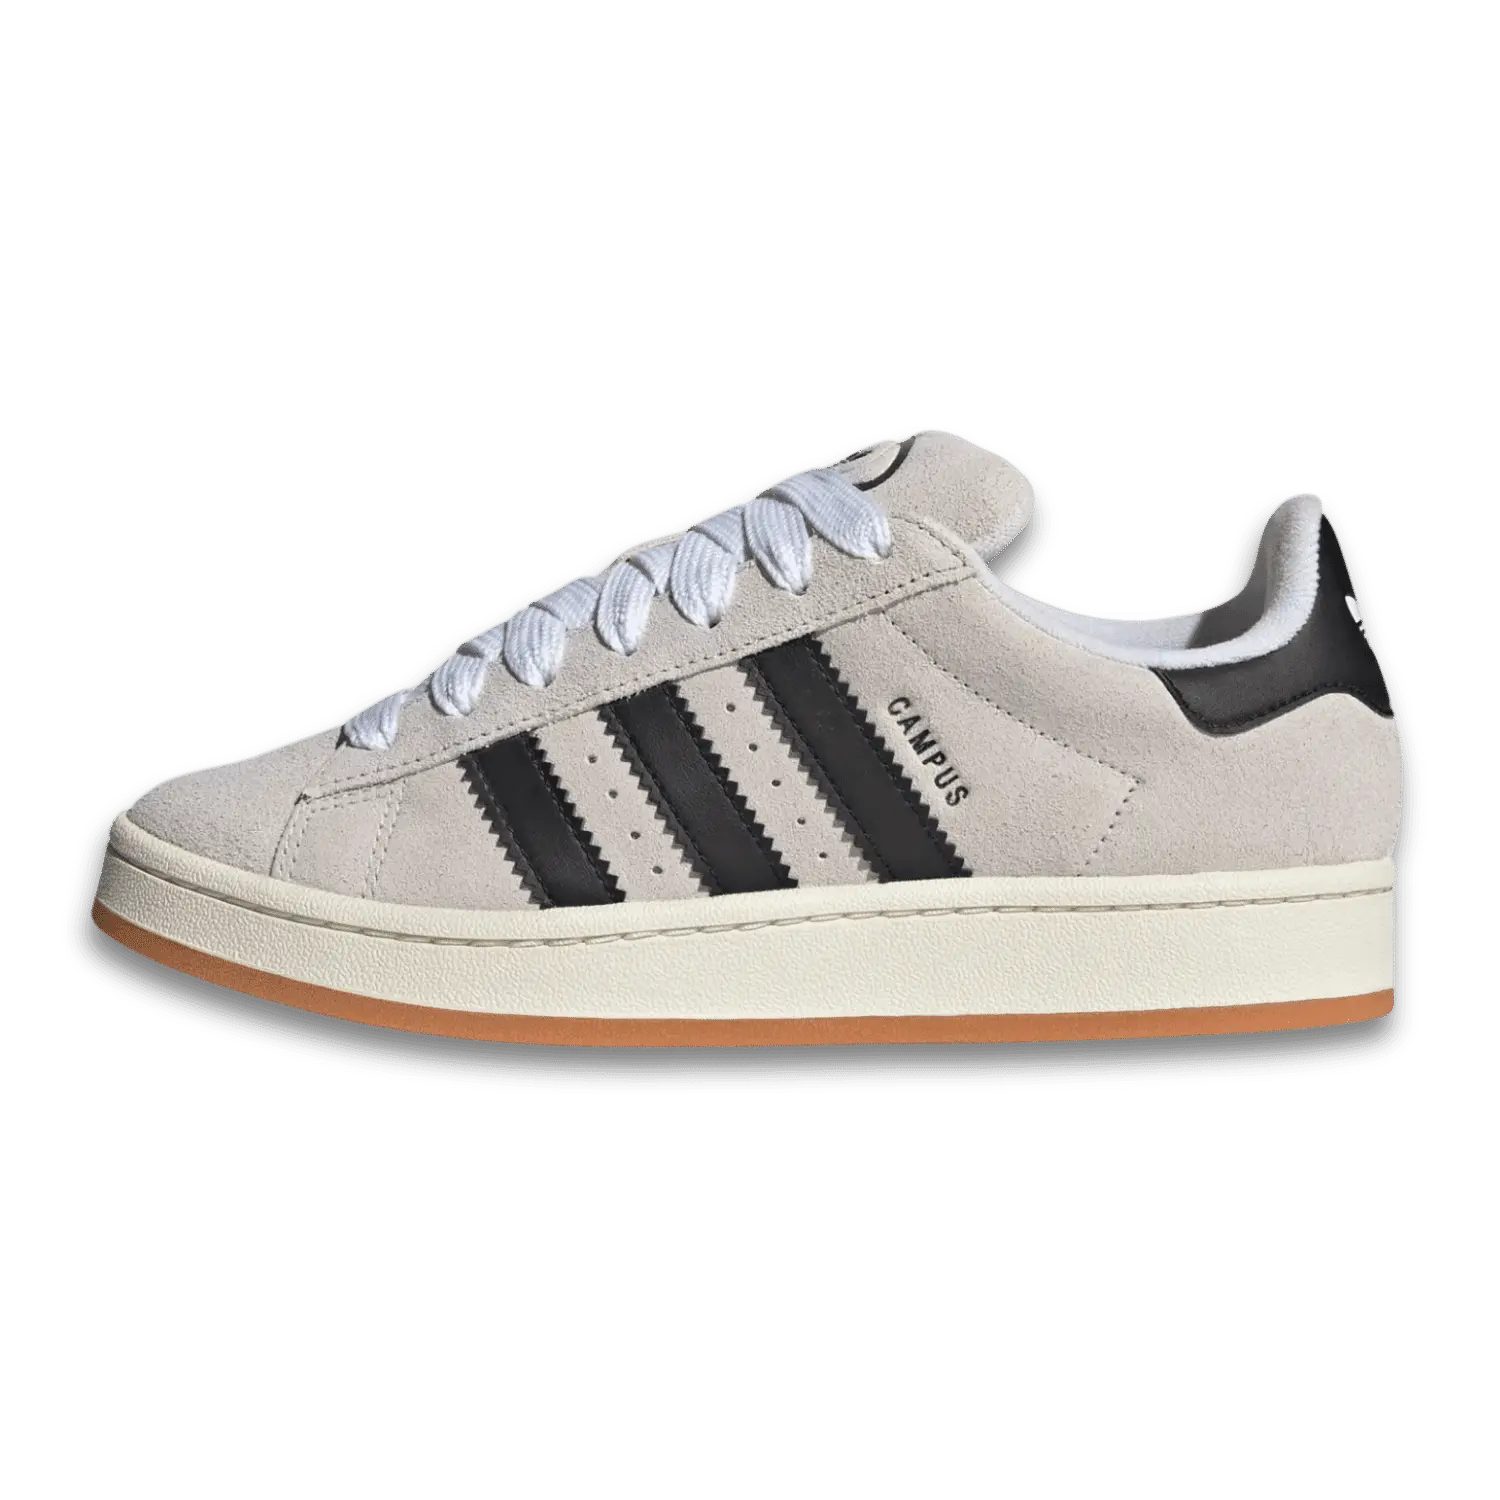 Adidas Campus 00s Crystal White Core Black - Sneakerterritory; Sneaker Territory; Adidas Campus beige